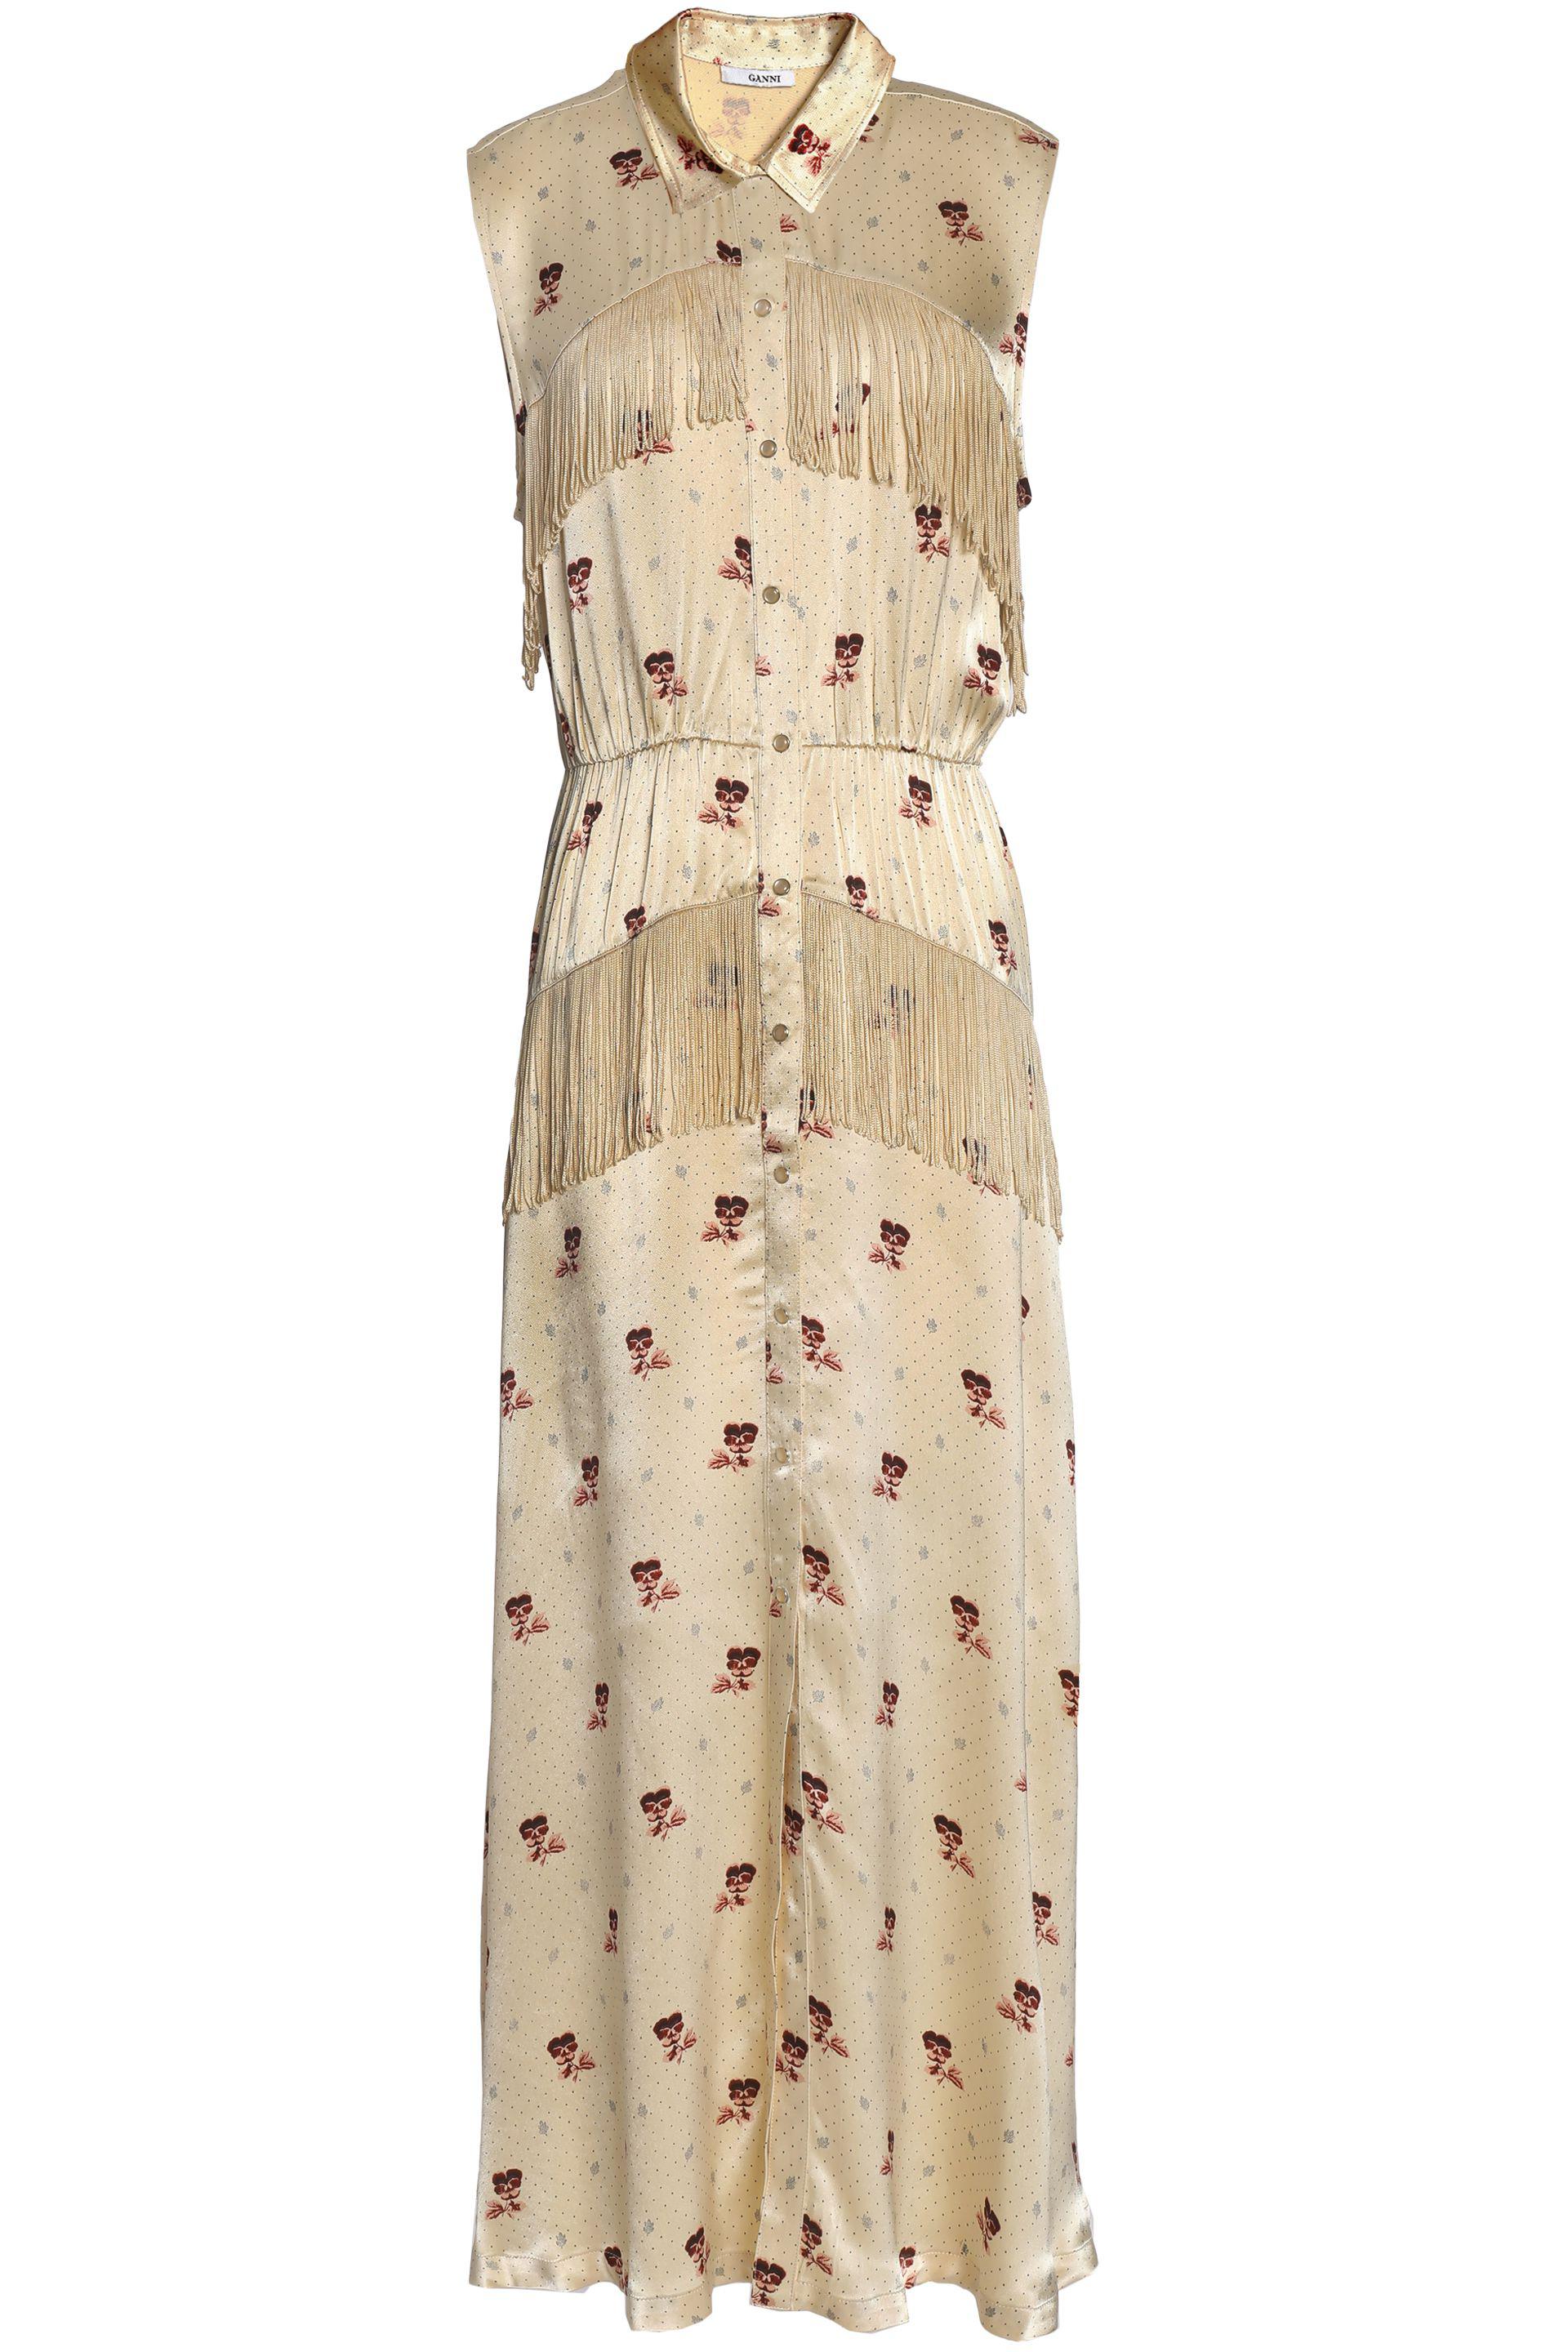 Ganni Donnelly Fringed Floral-print Satin Midi Dress in Beige (Natural) -  Lyst